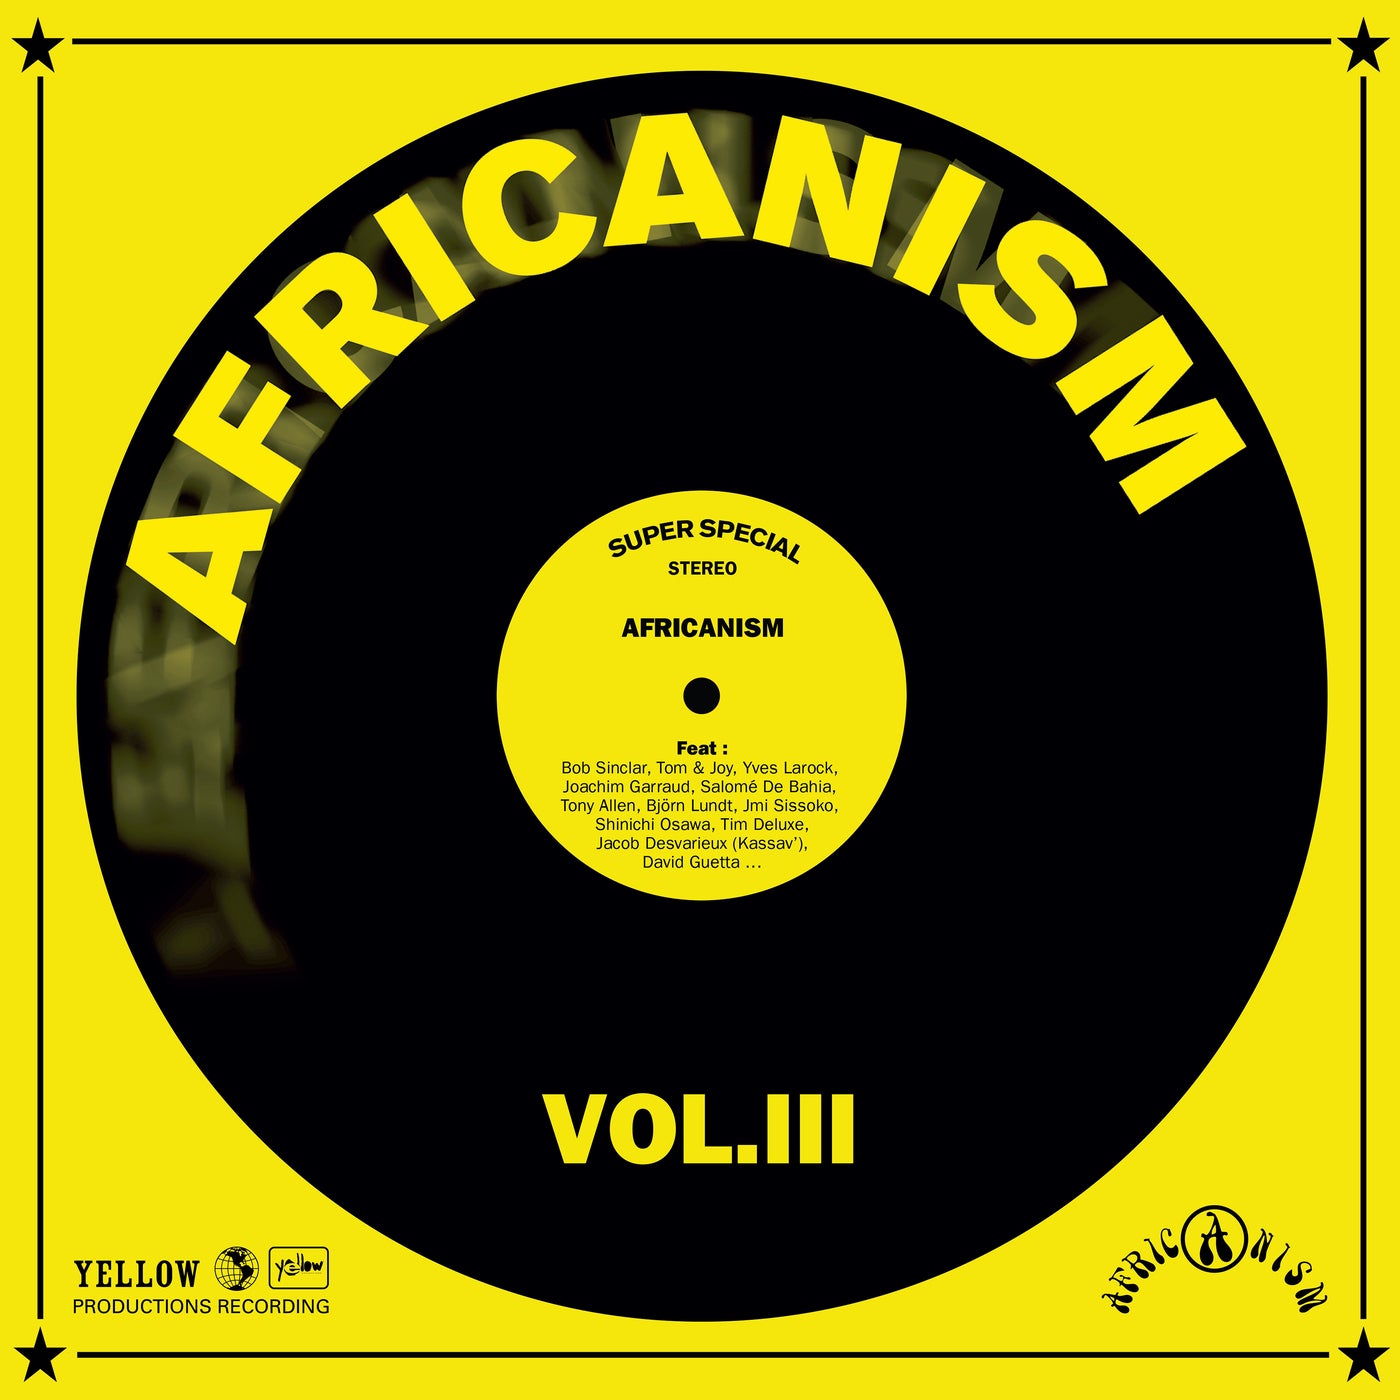 Cover - Africanism, Bjorn Lundt, Yvan Voice - Imbalaye (feat. Yvan Voice) (Original Mix)